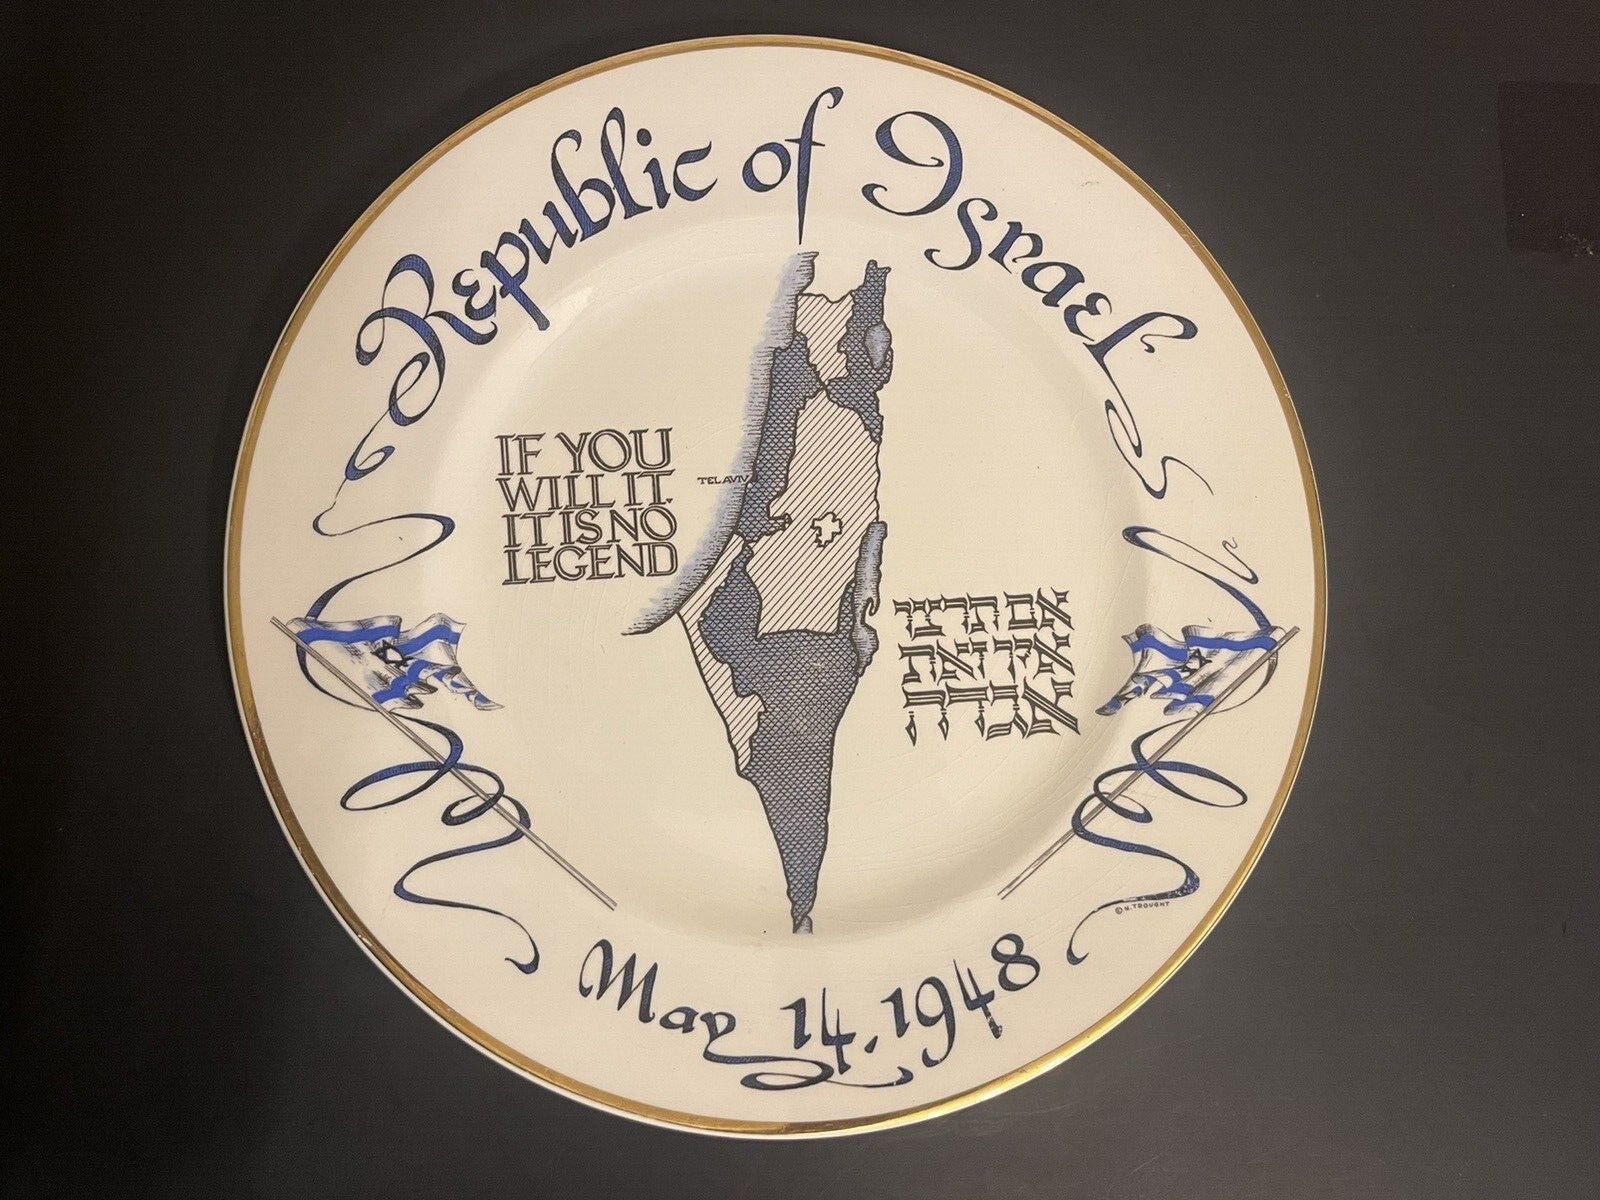 Vintage Republic Of Israel Commemorative Plate May 14, 1948 Gold Trim